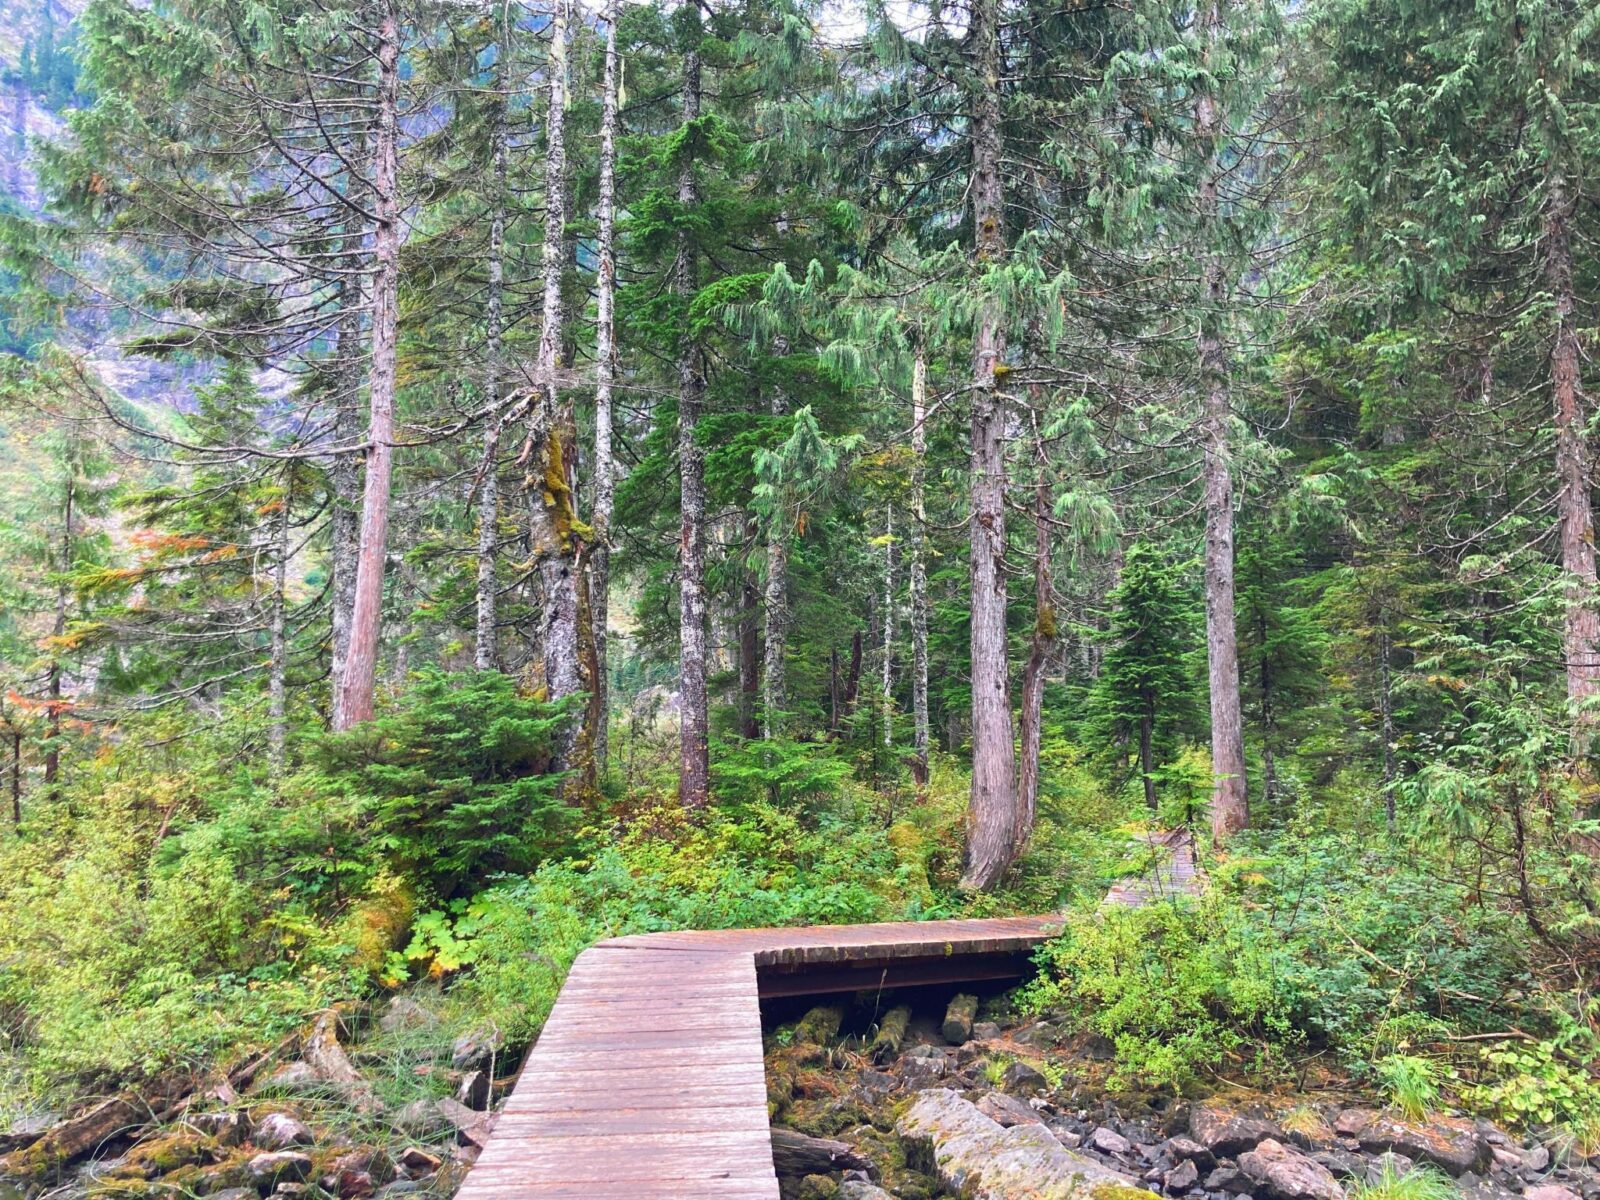 A boardwalk in the forest over a creek.